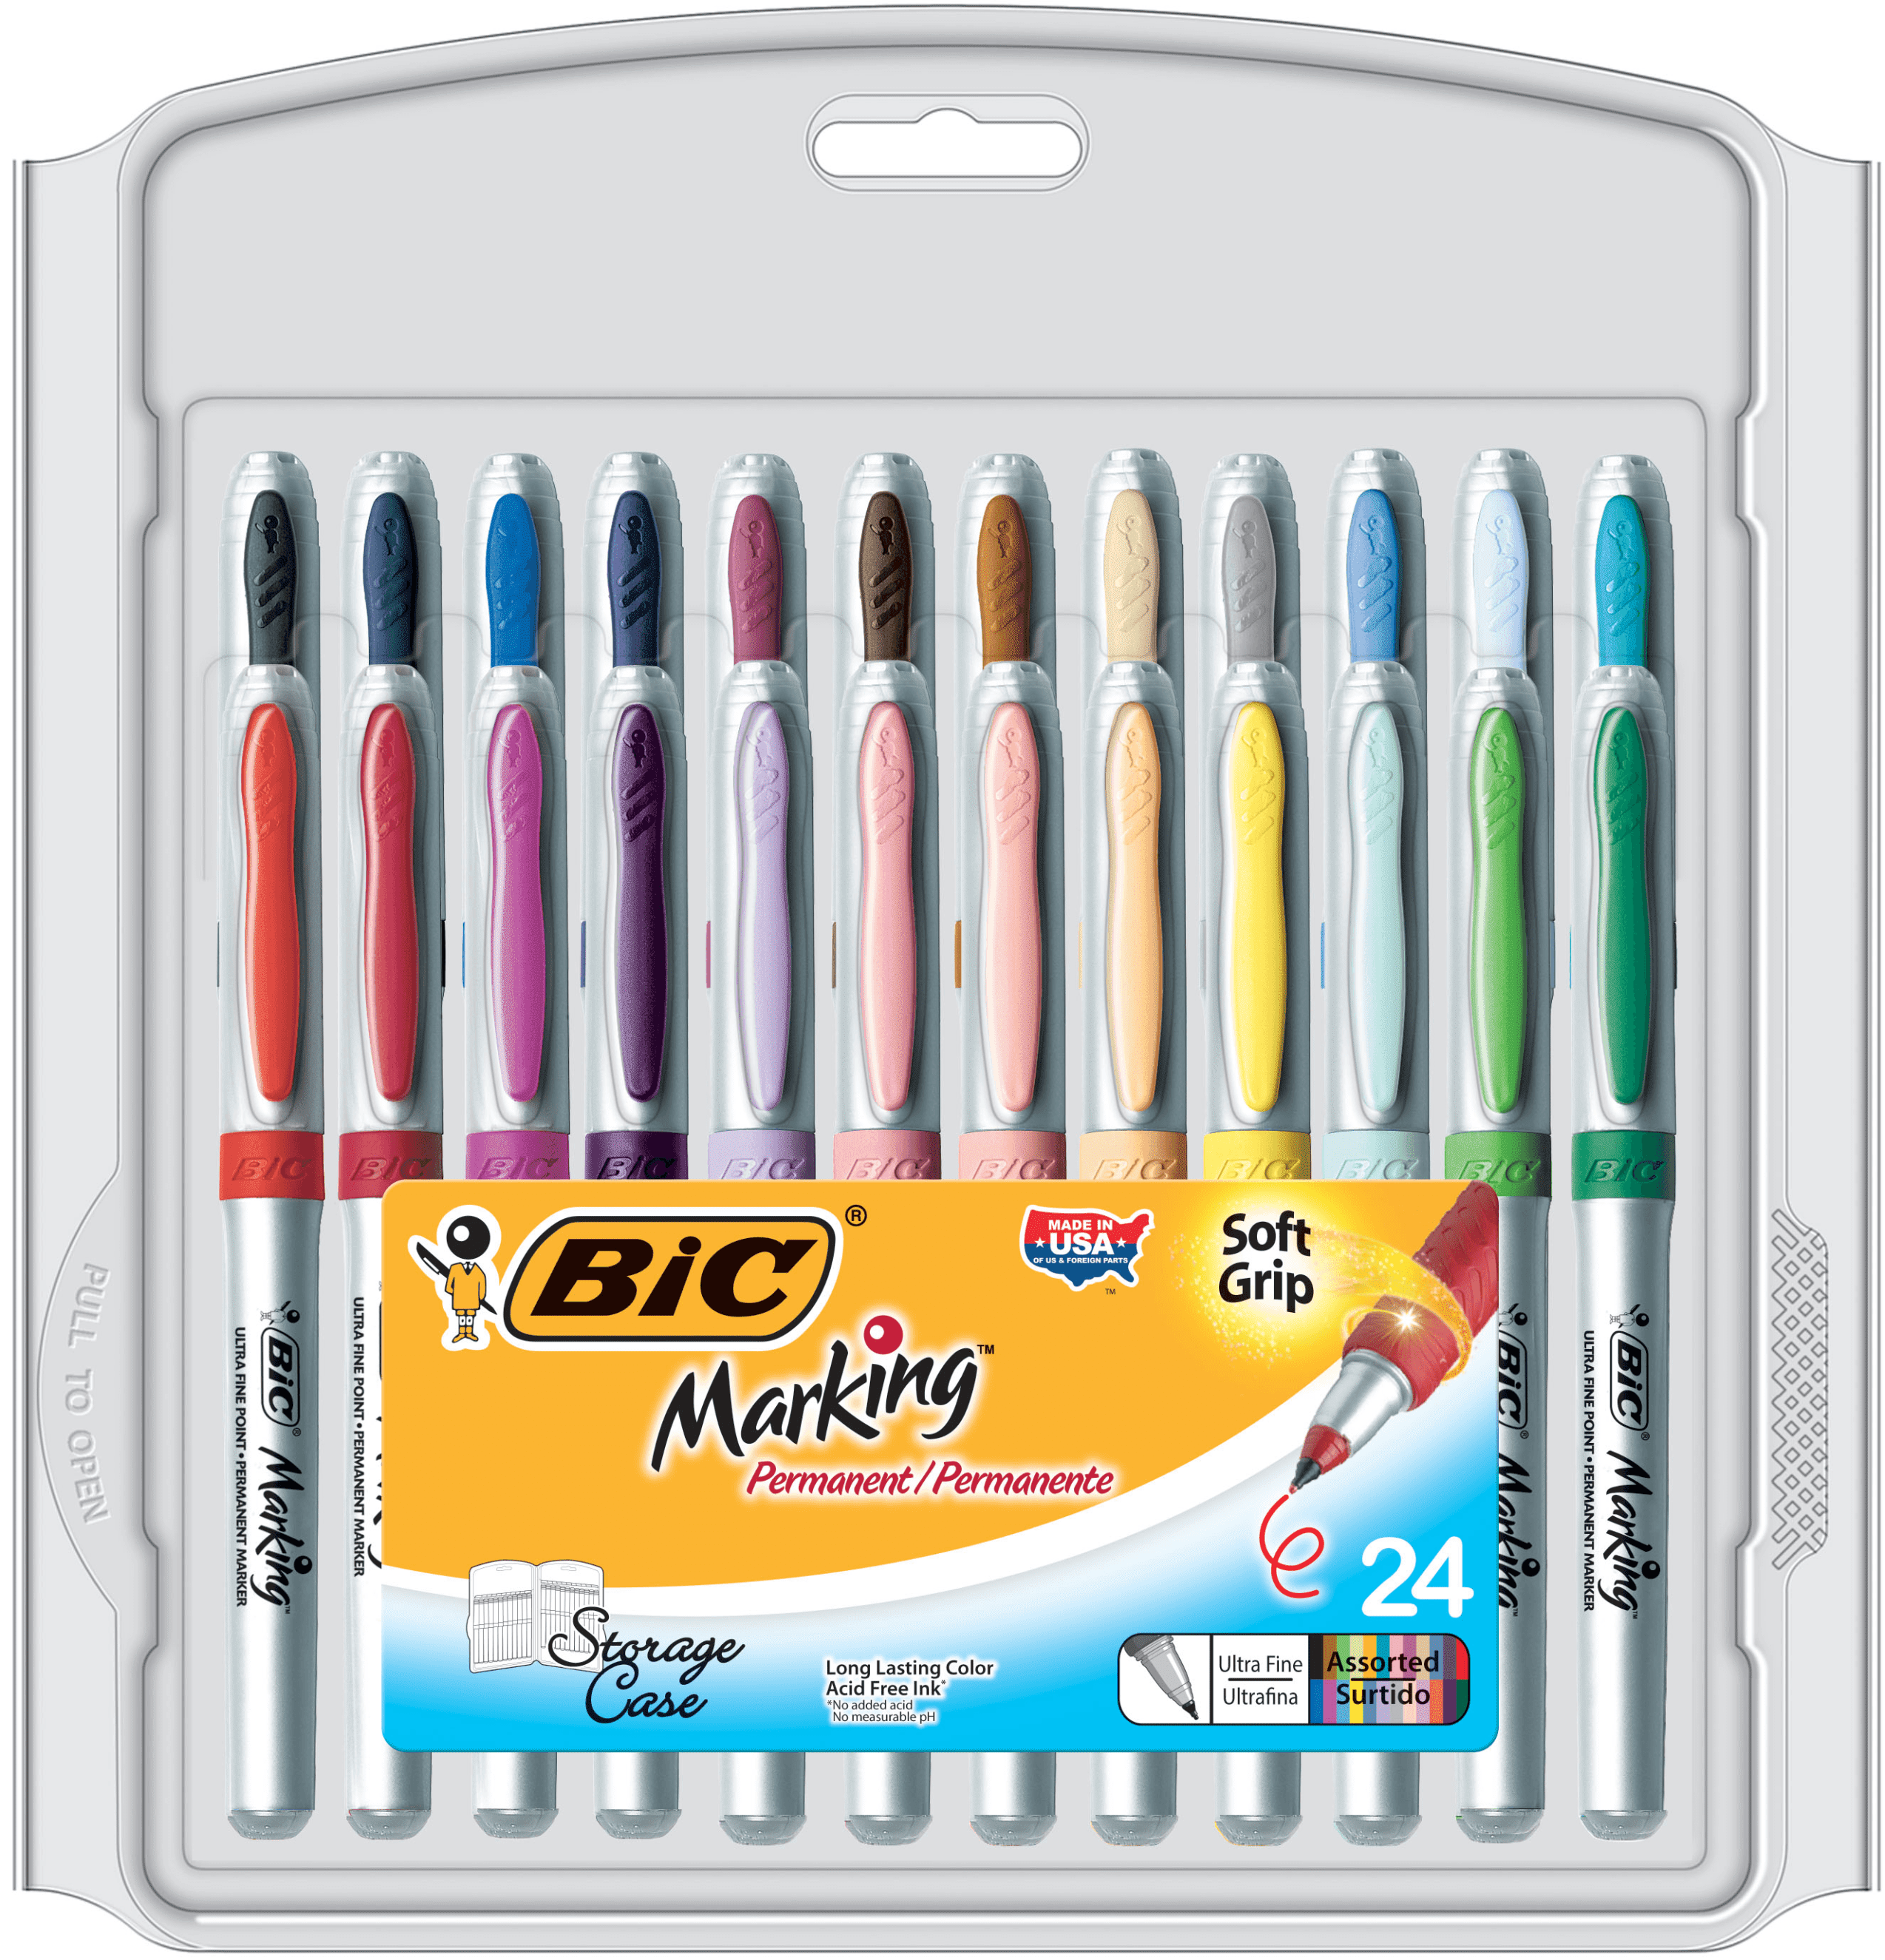 Bic Magic Marker, Brush Tip Marker, Assorted Colors, 36-Count